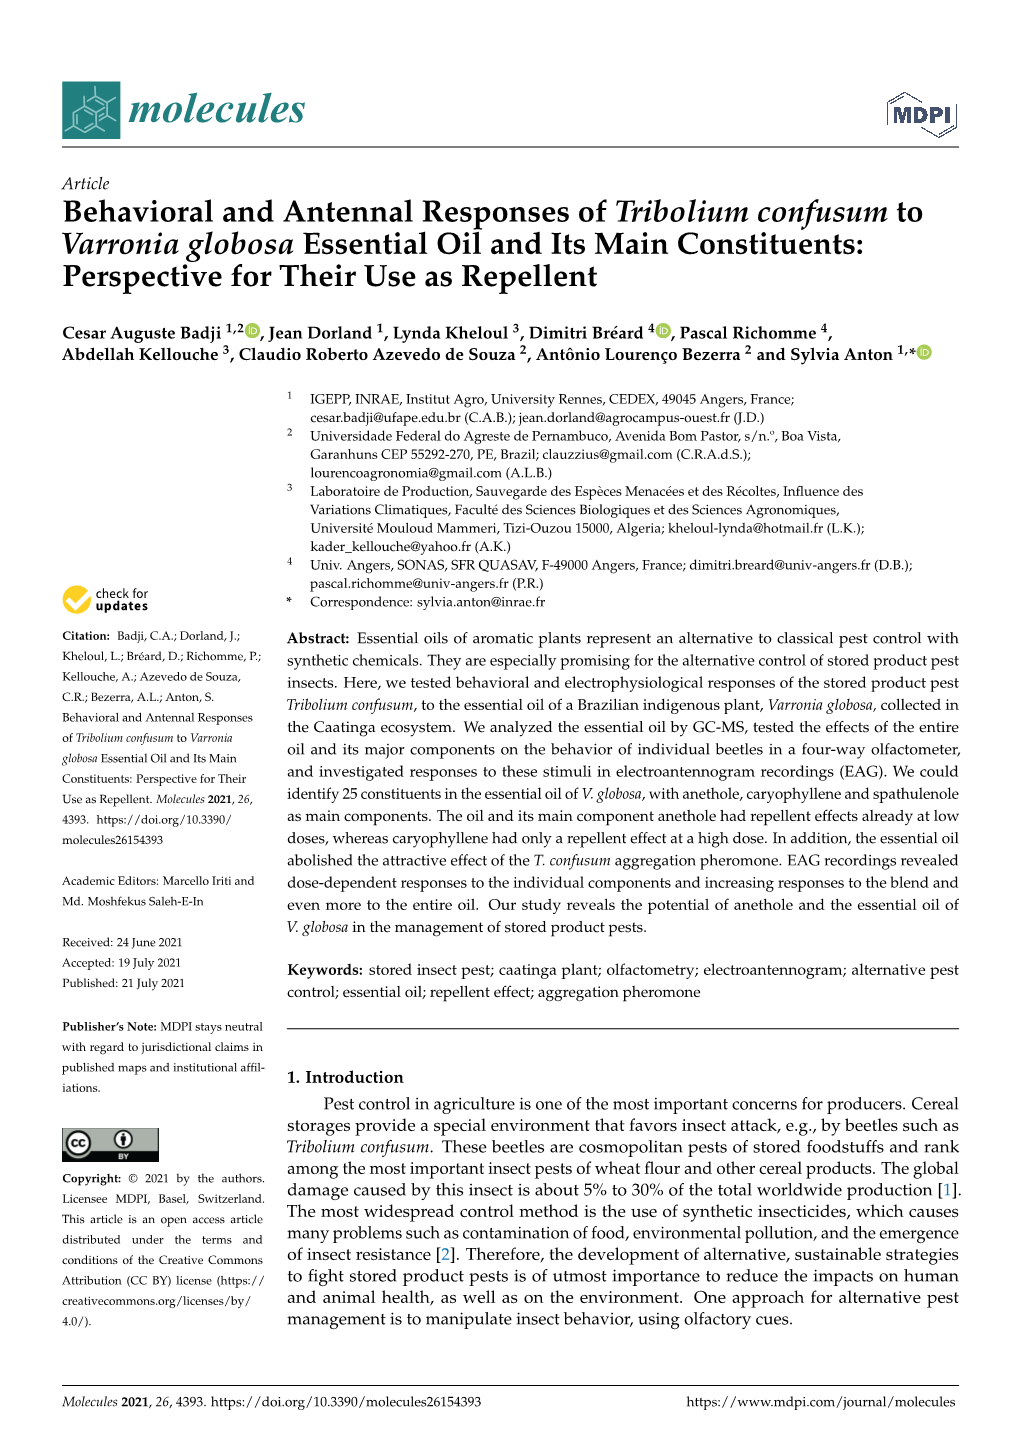 Behavioral and Antennal Responses of Tribolium Confusum to Varronia Globosa Essential Oil and Its Main Constituents: Perspective for Their Use As Repellent